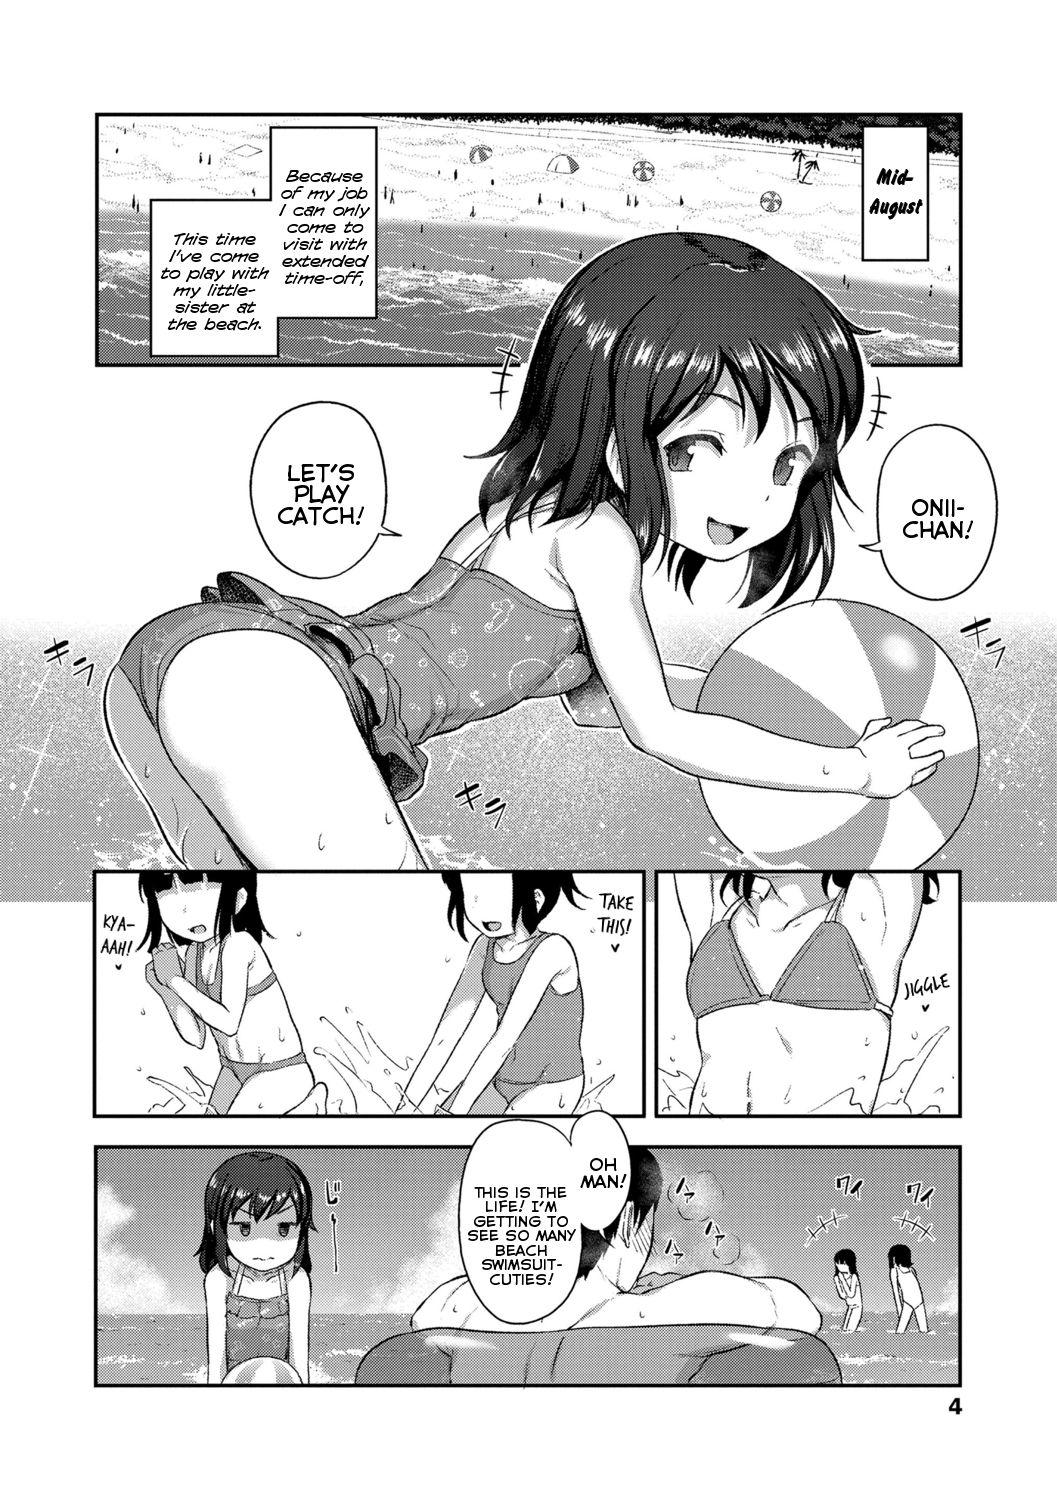 Free Rough Sex [Hayake] Imouto no Hadaka o Mite Koufun Suru nante Hen na Onii-chan | What Kind of Weirdo Onii-chan Gets Excited From Seeing His Little Sister Naked? [English] [Mistvern + Shippoyasha] [Digital] Gloryhole - Page 6